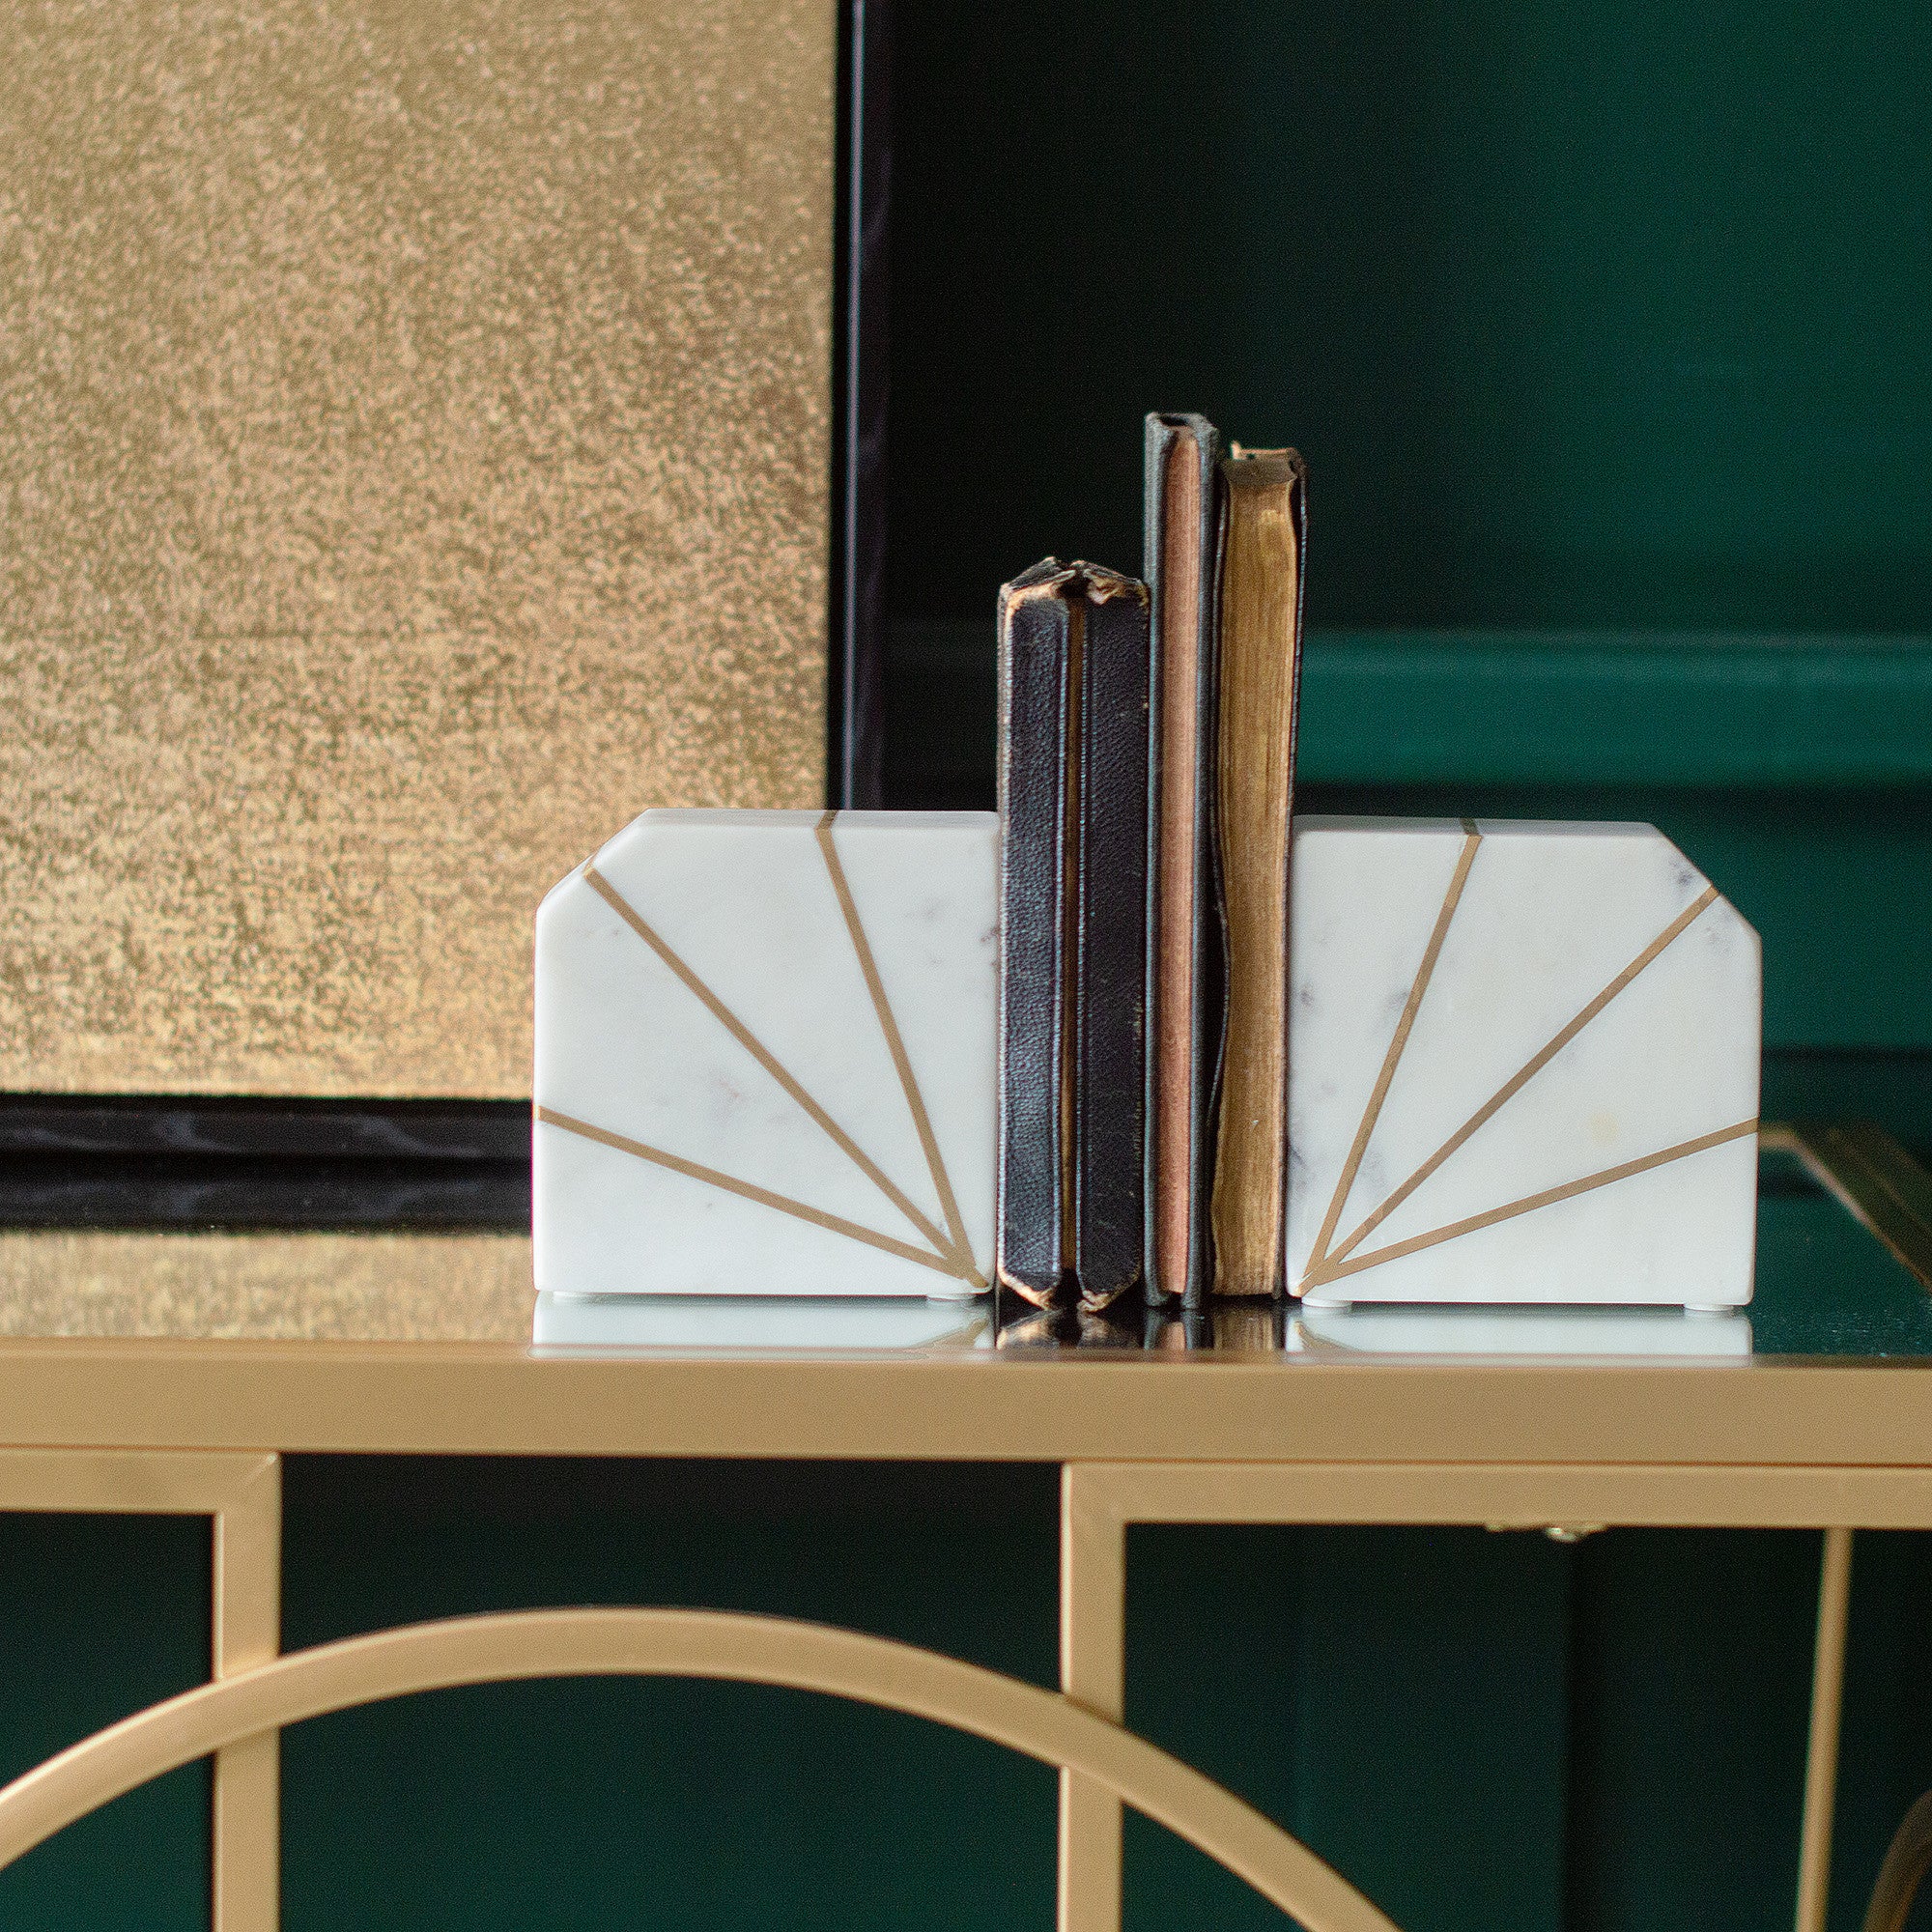 White Marble & Brass Deco Bookends